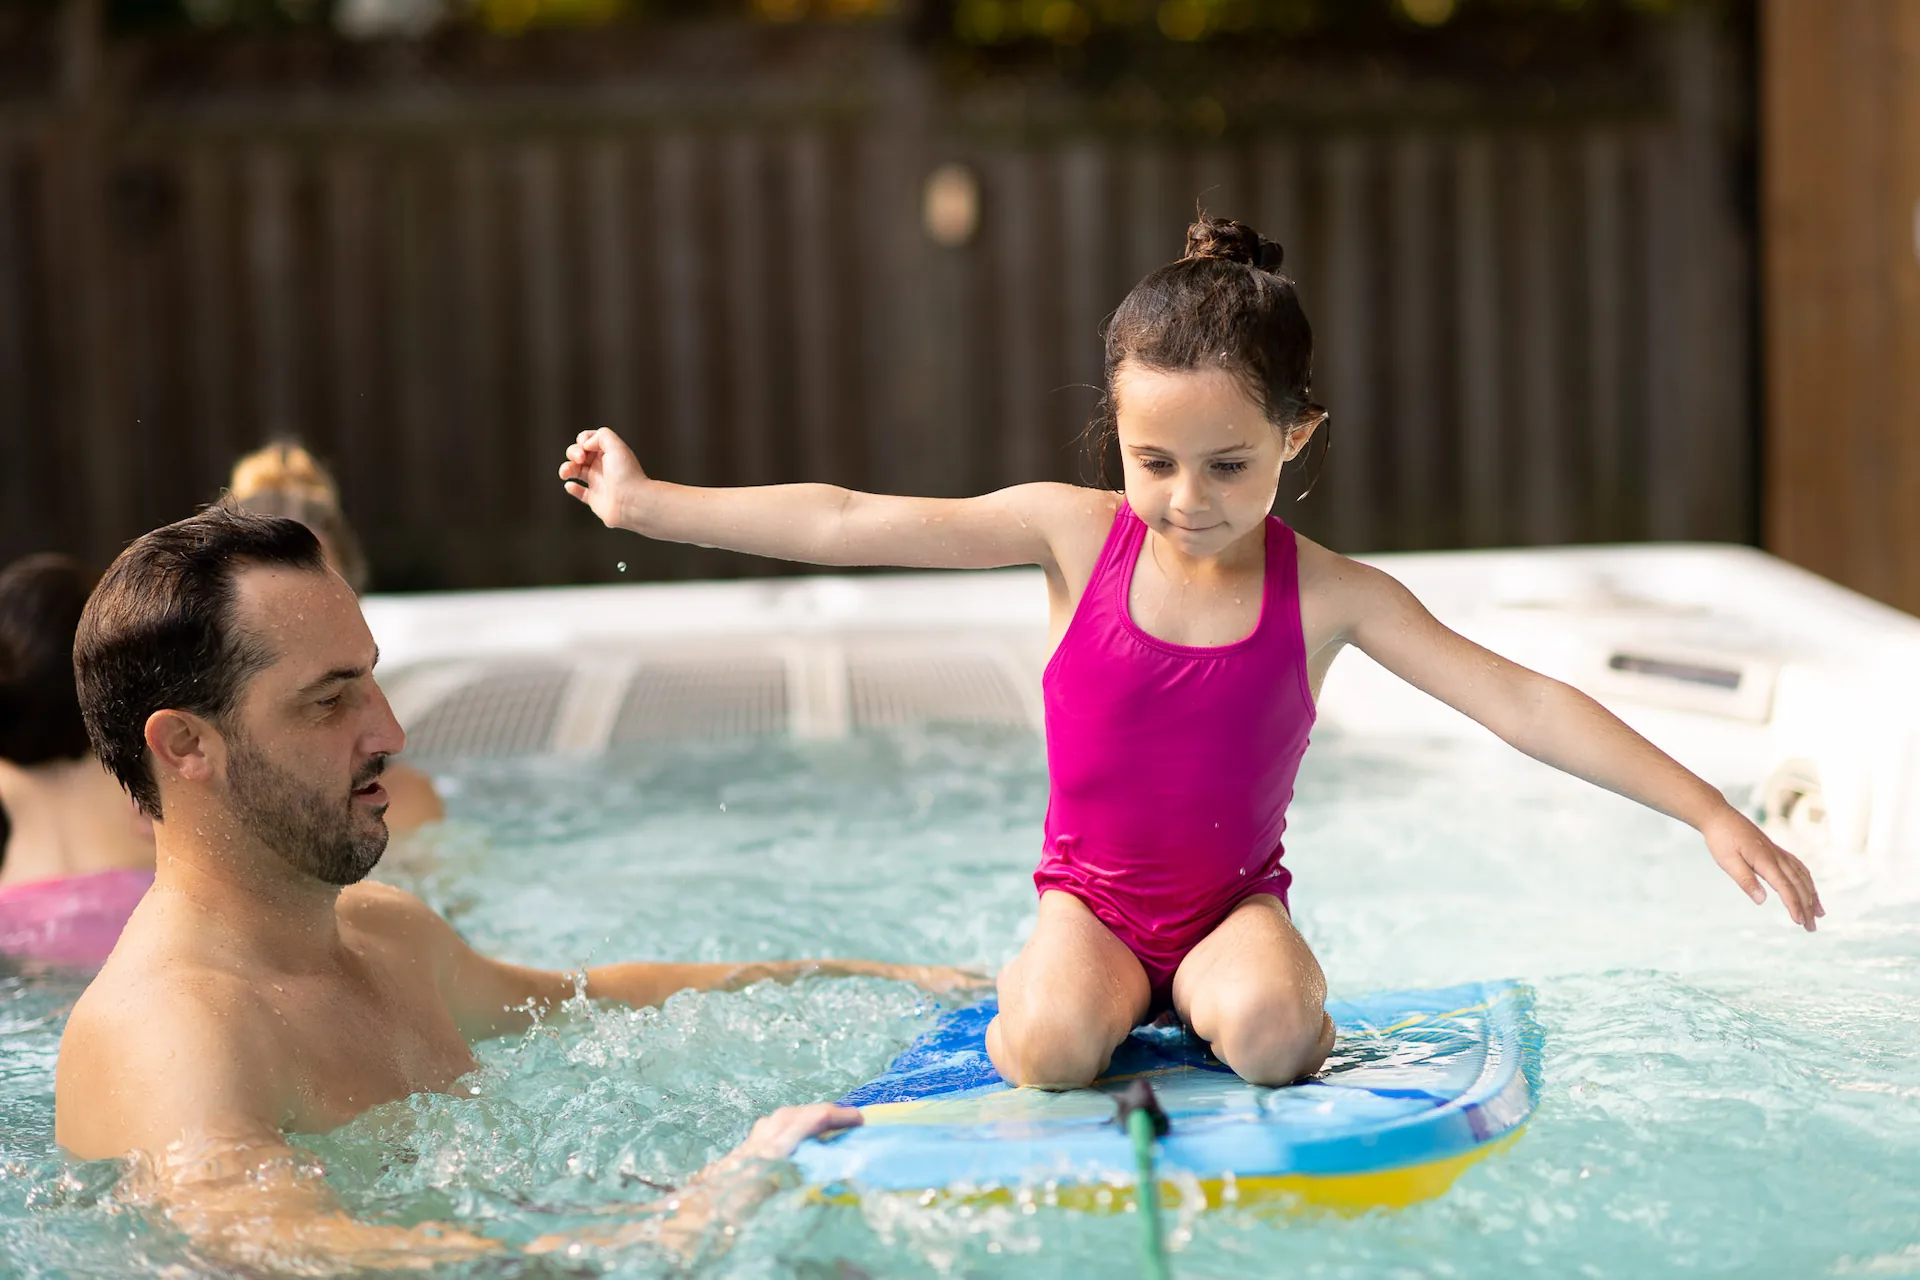 Medium shot of a parent supporting a child riding a body board tethered to the interior of a swim spa.